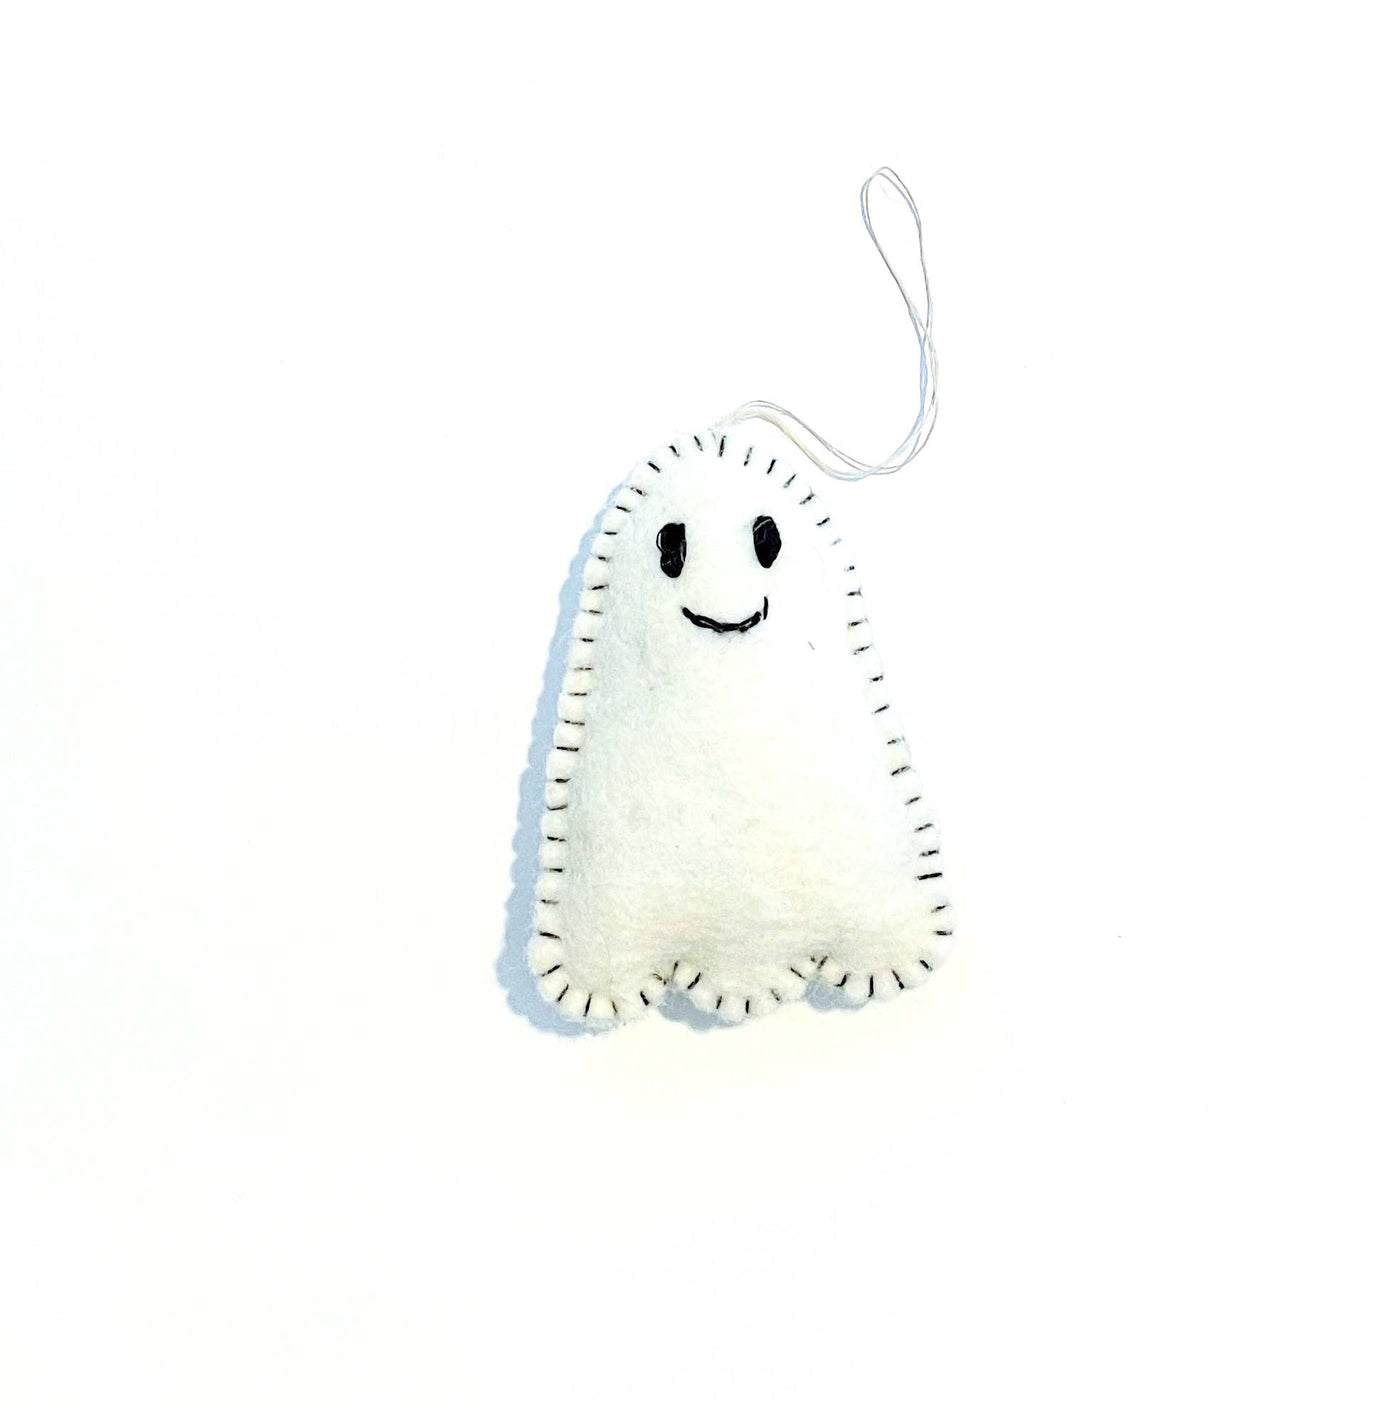 Bo the Smiling Ghost Eco Ornament